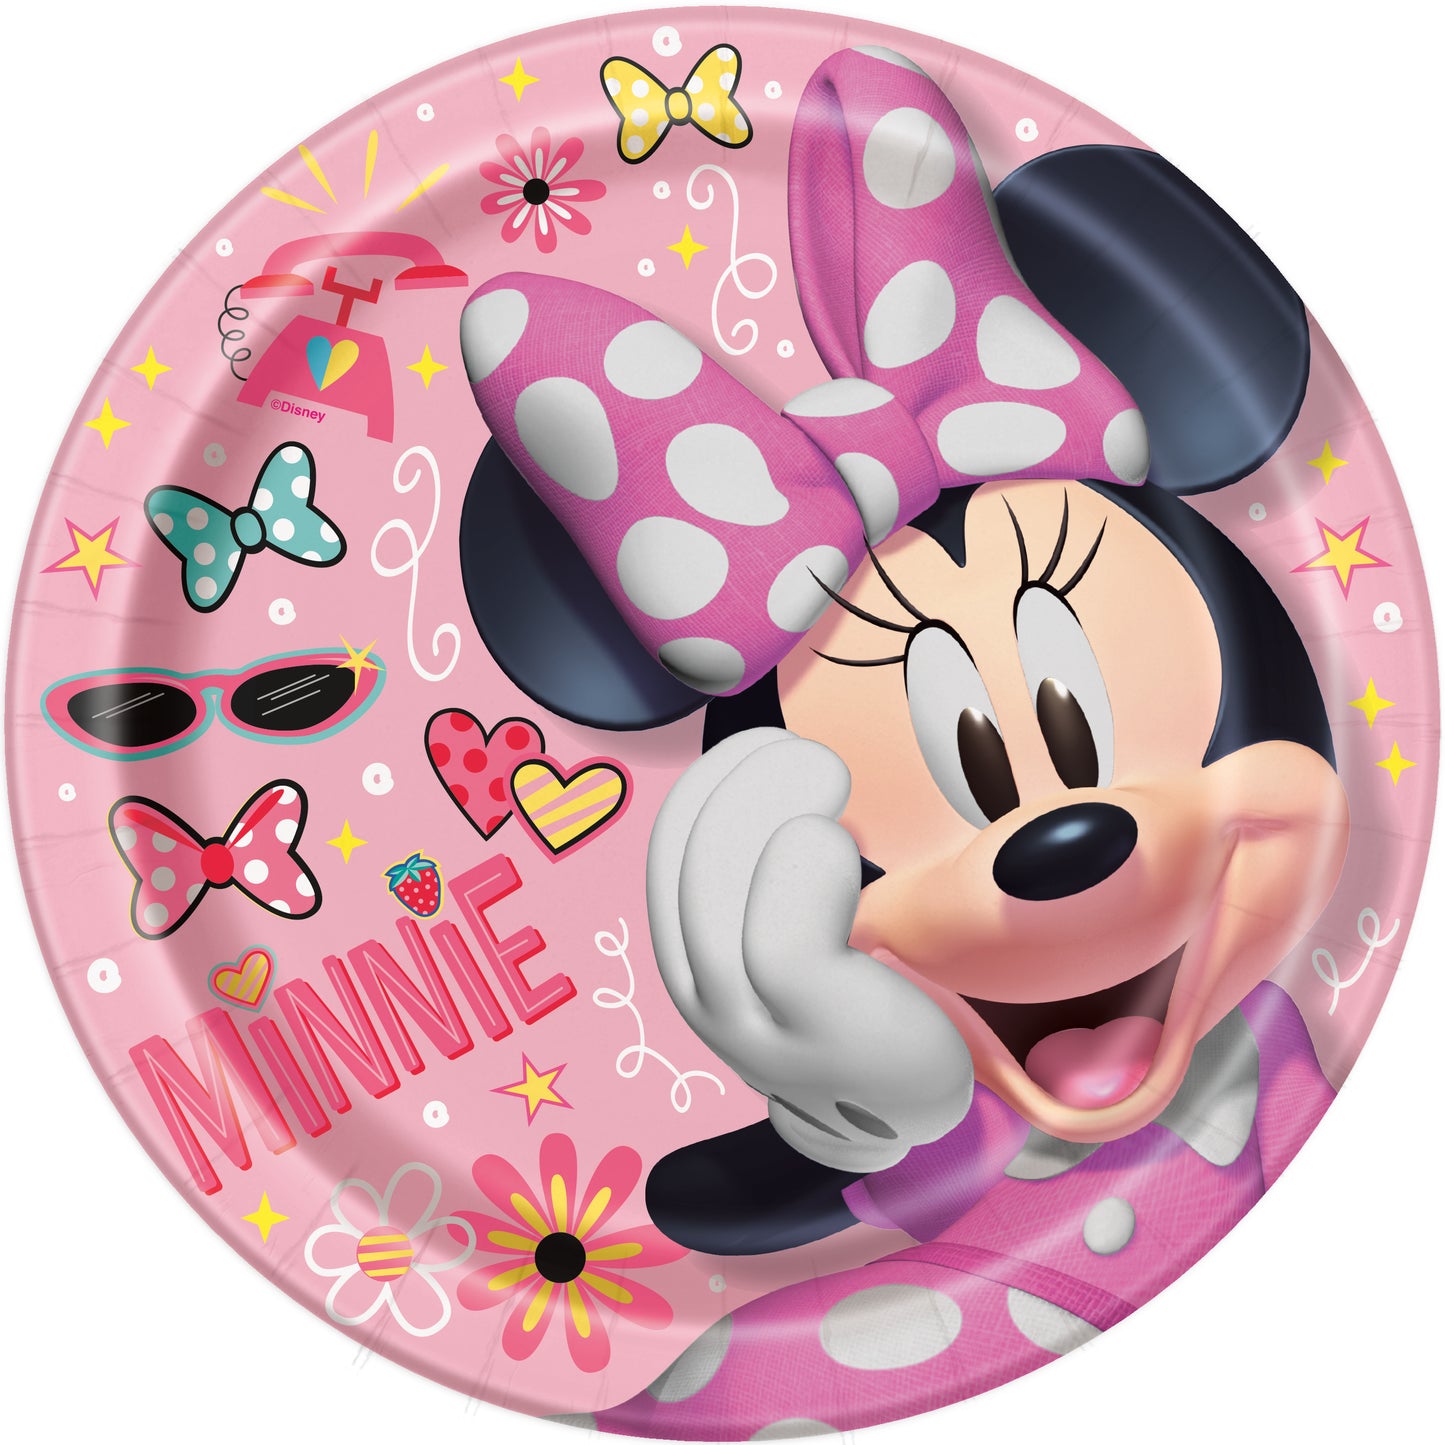 Disney Iconic Minnie Mouse Round 9" Dinner Plates, 8-pc